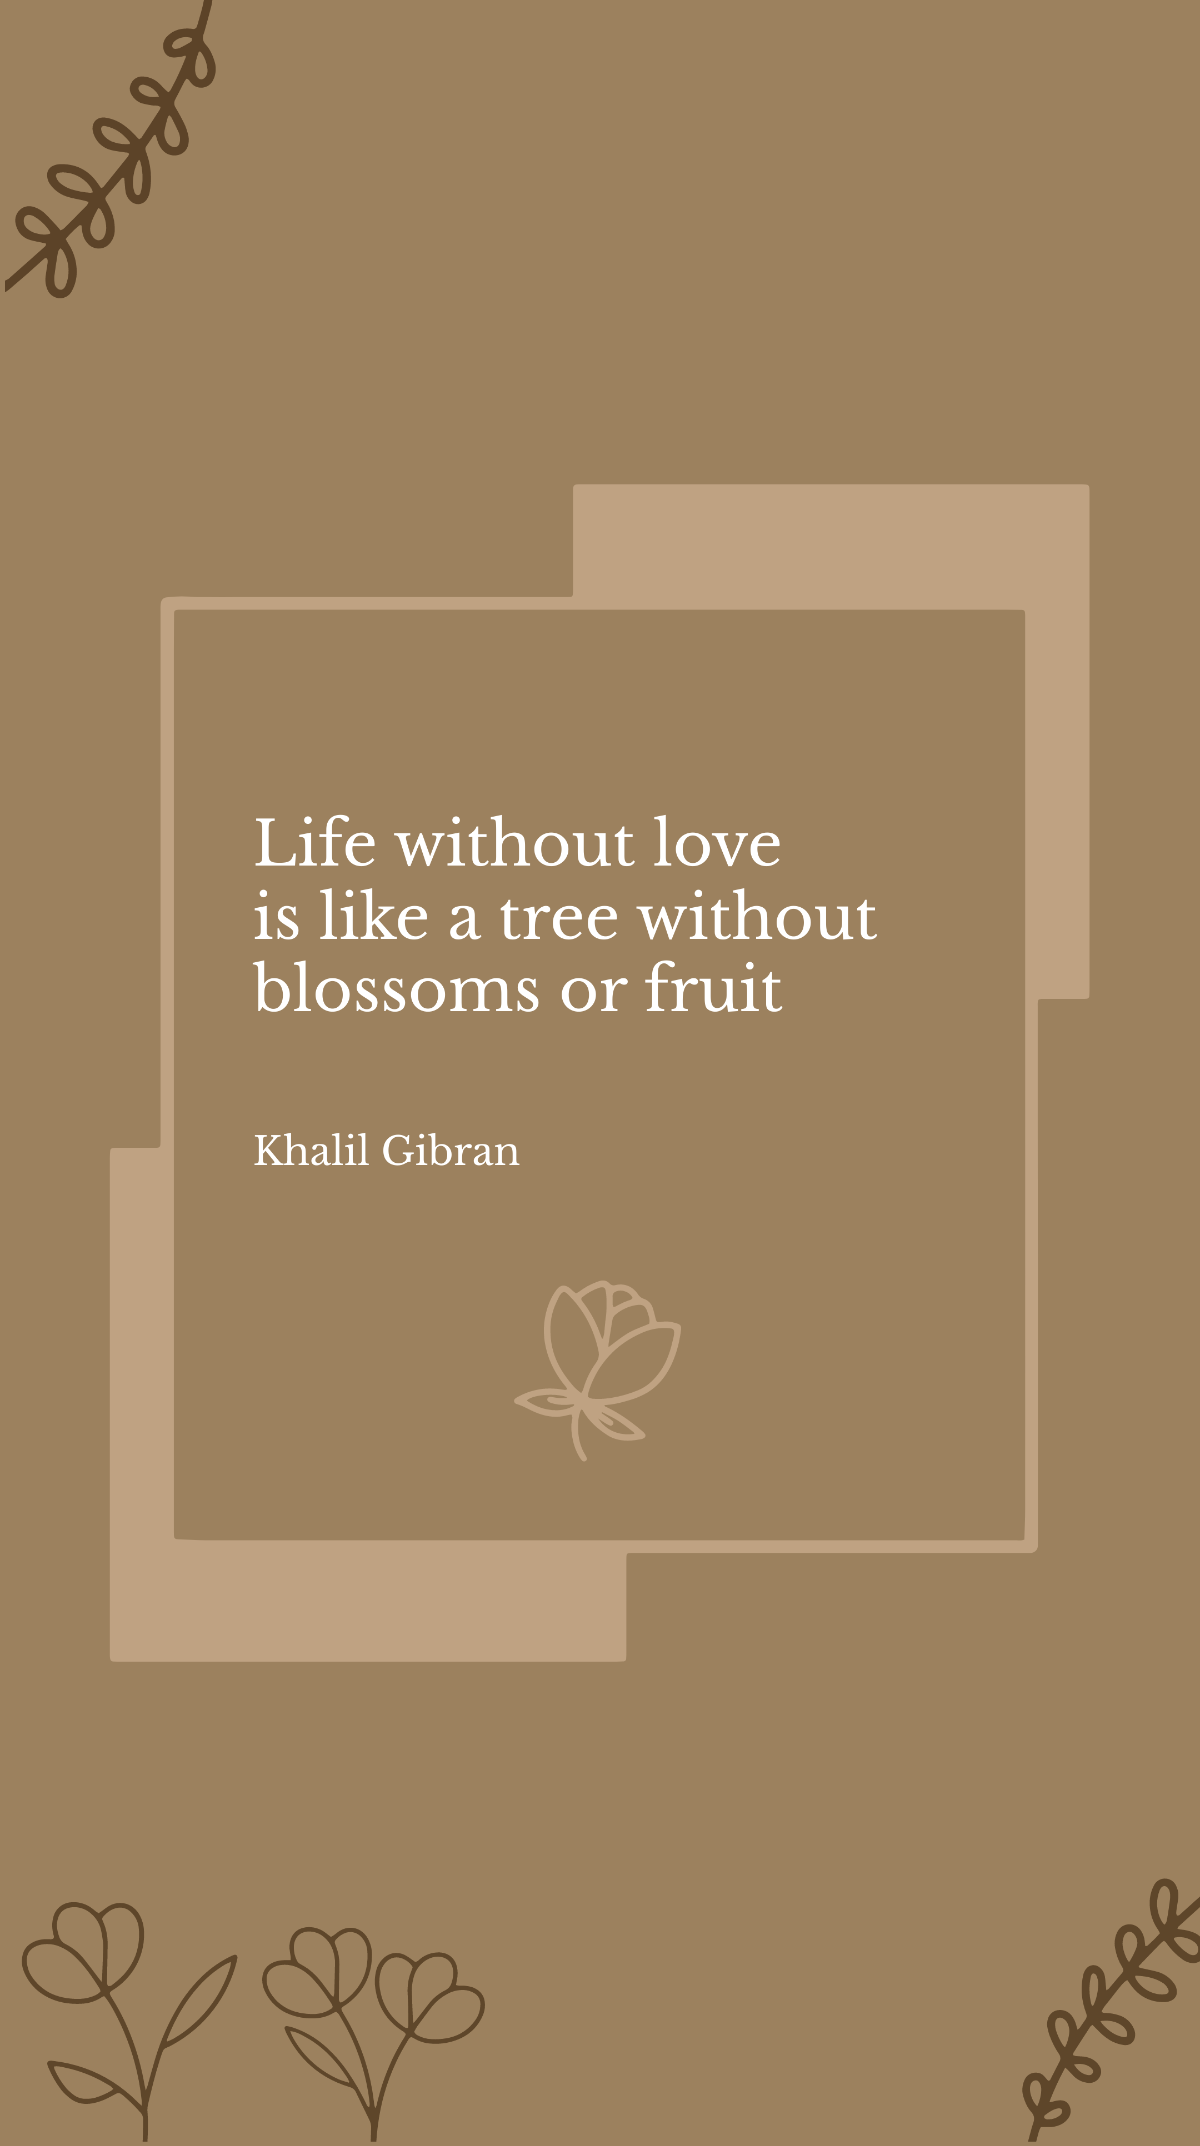 Free Khalil Gibran - Life without love is like a tree without blossoms or fruit Template